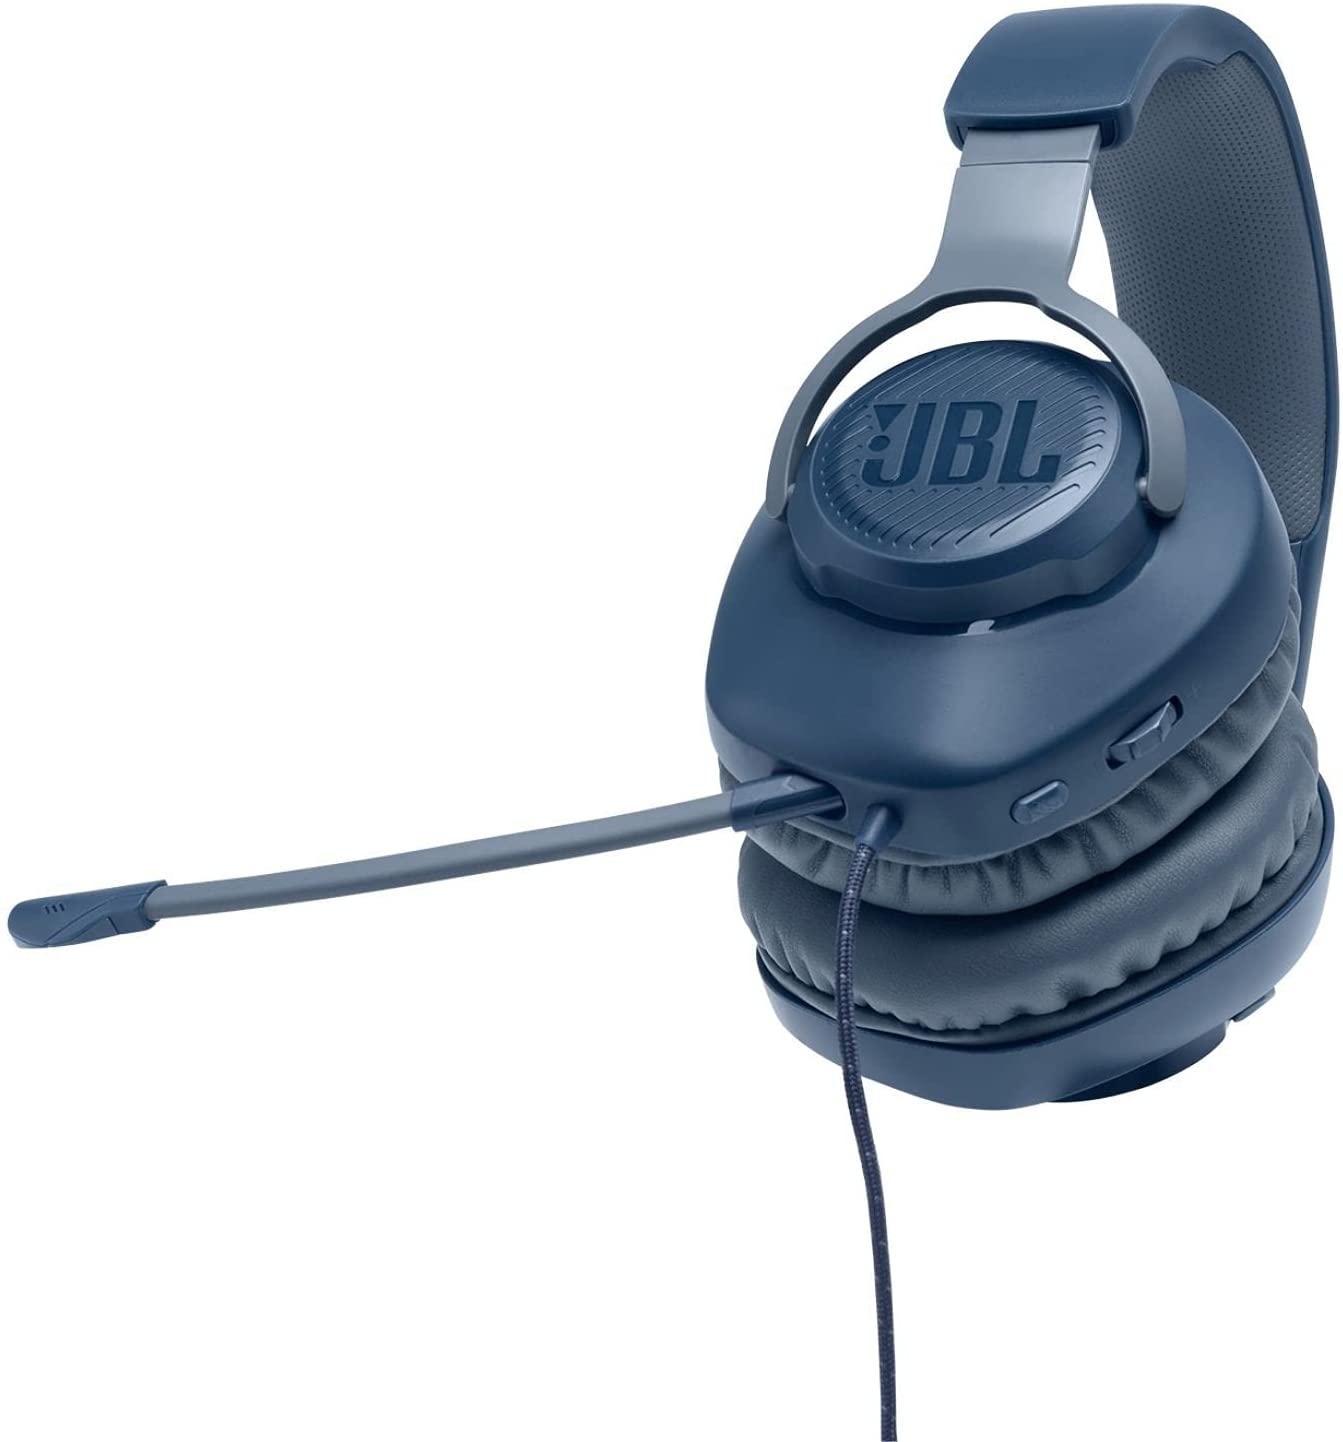 JBL Quantum 100 Over-Ear Wired Gaming Headset with Detachable Microphone, QuantumSOUND Signature, Windows Sonic Spatial Sound Support and Memory Foam Padded Earpads for PC, Mobile, and Consoles (Black, Blue, White)